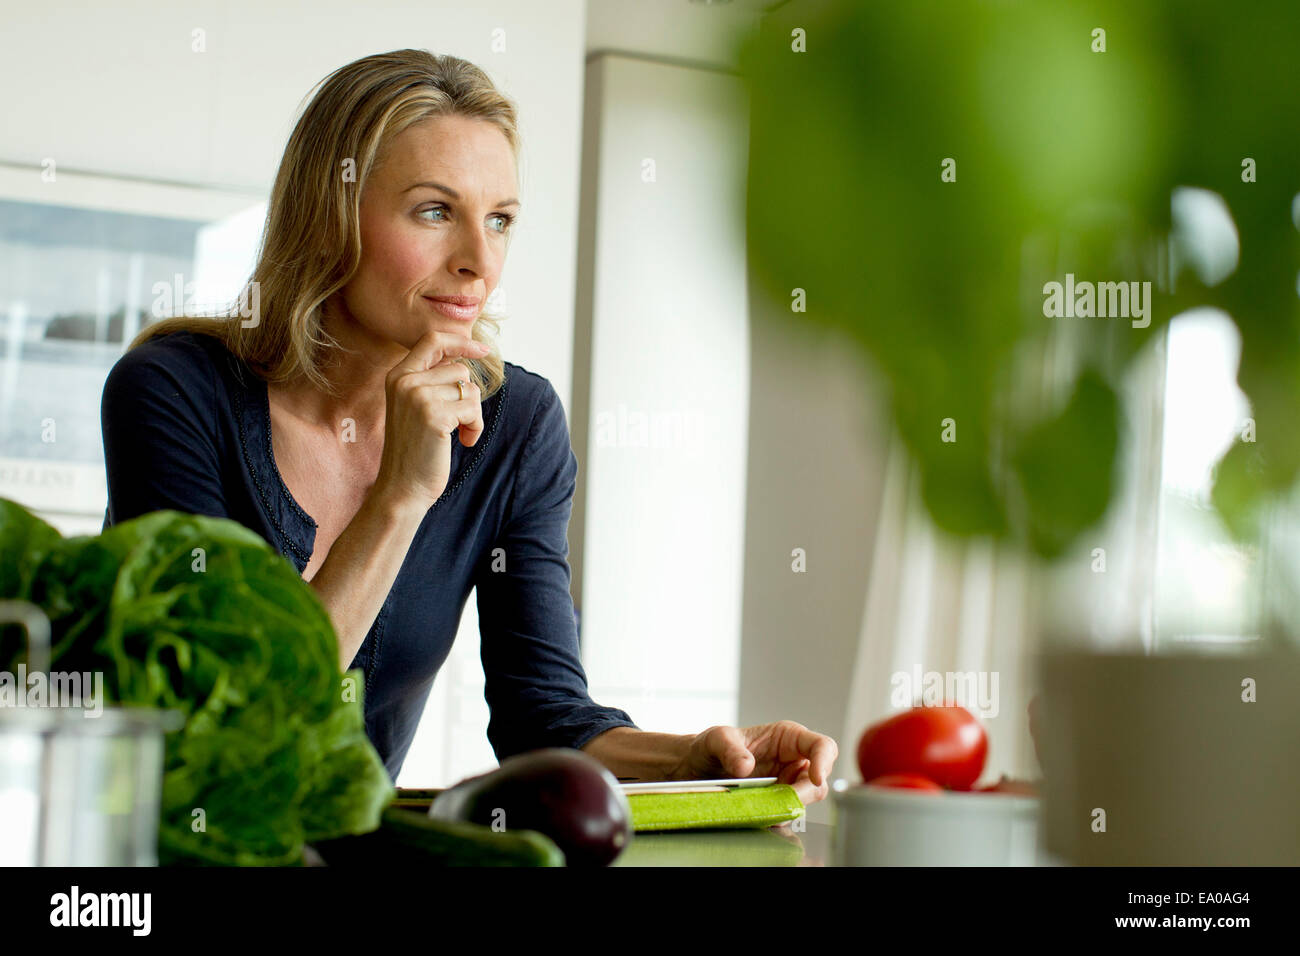 Mature woman with digital tablet Stock Photo